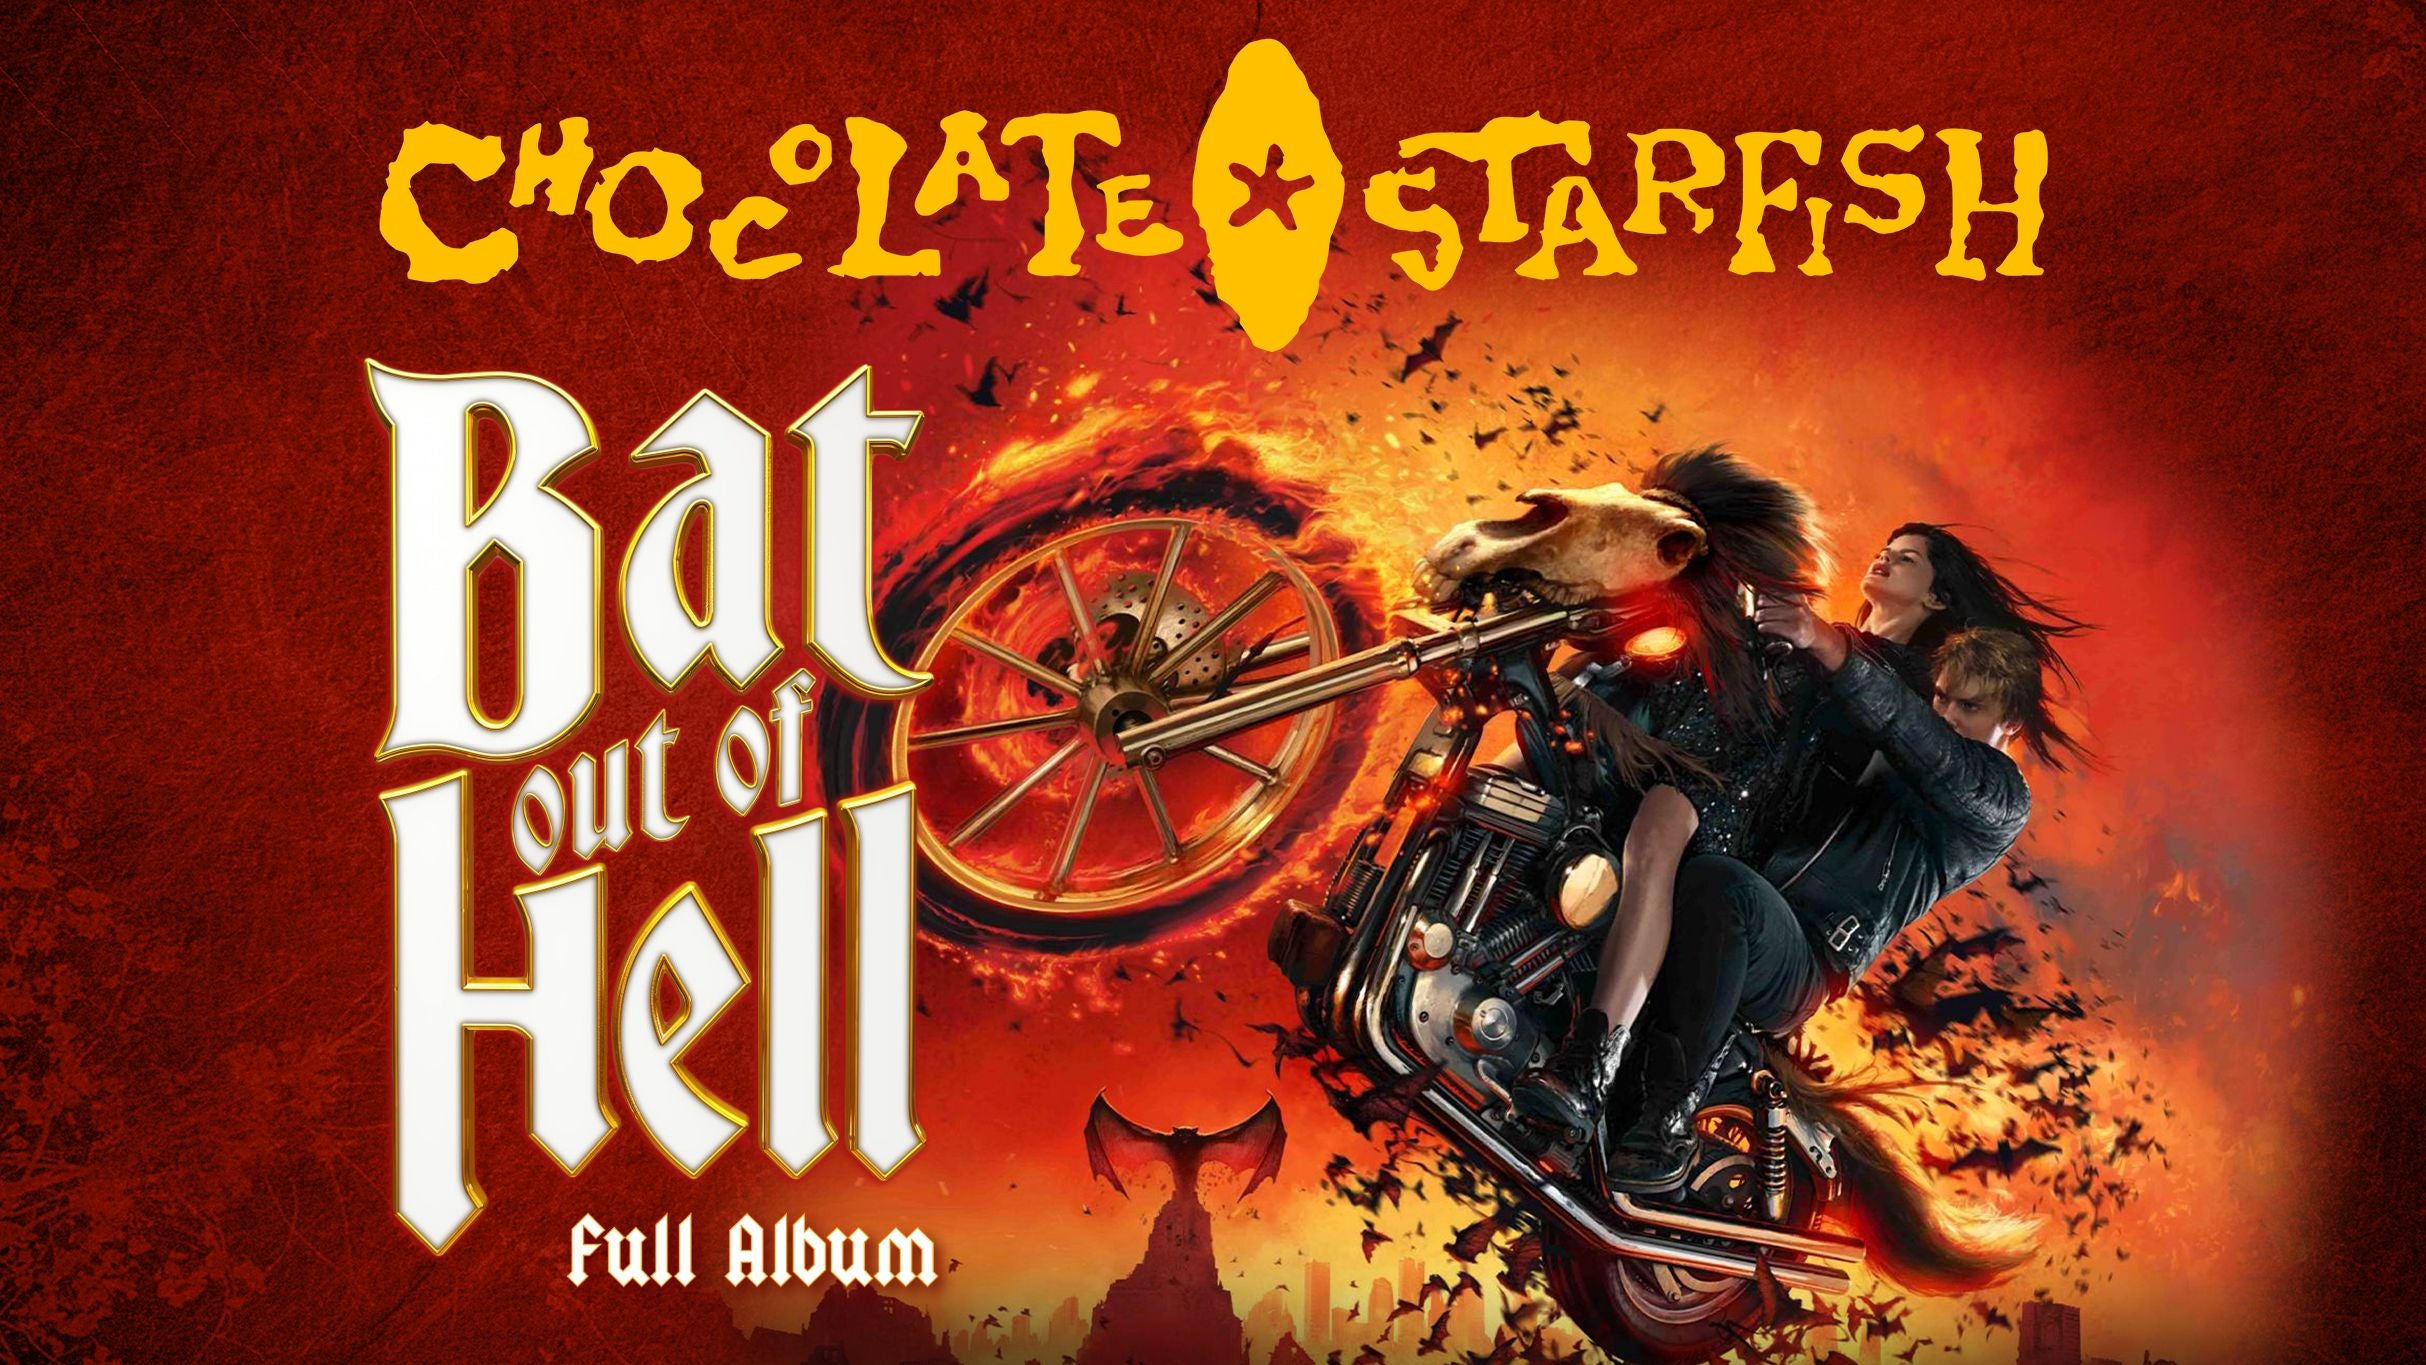 Image used with permission from Ticketmaster | Chocolate Starfish Bat Out of Hell tickets